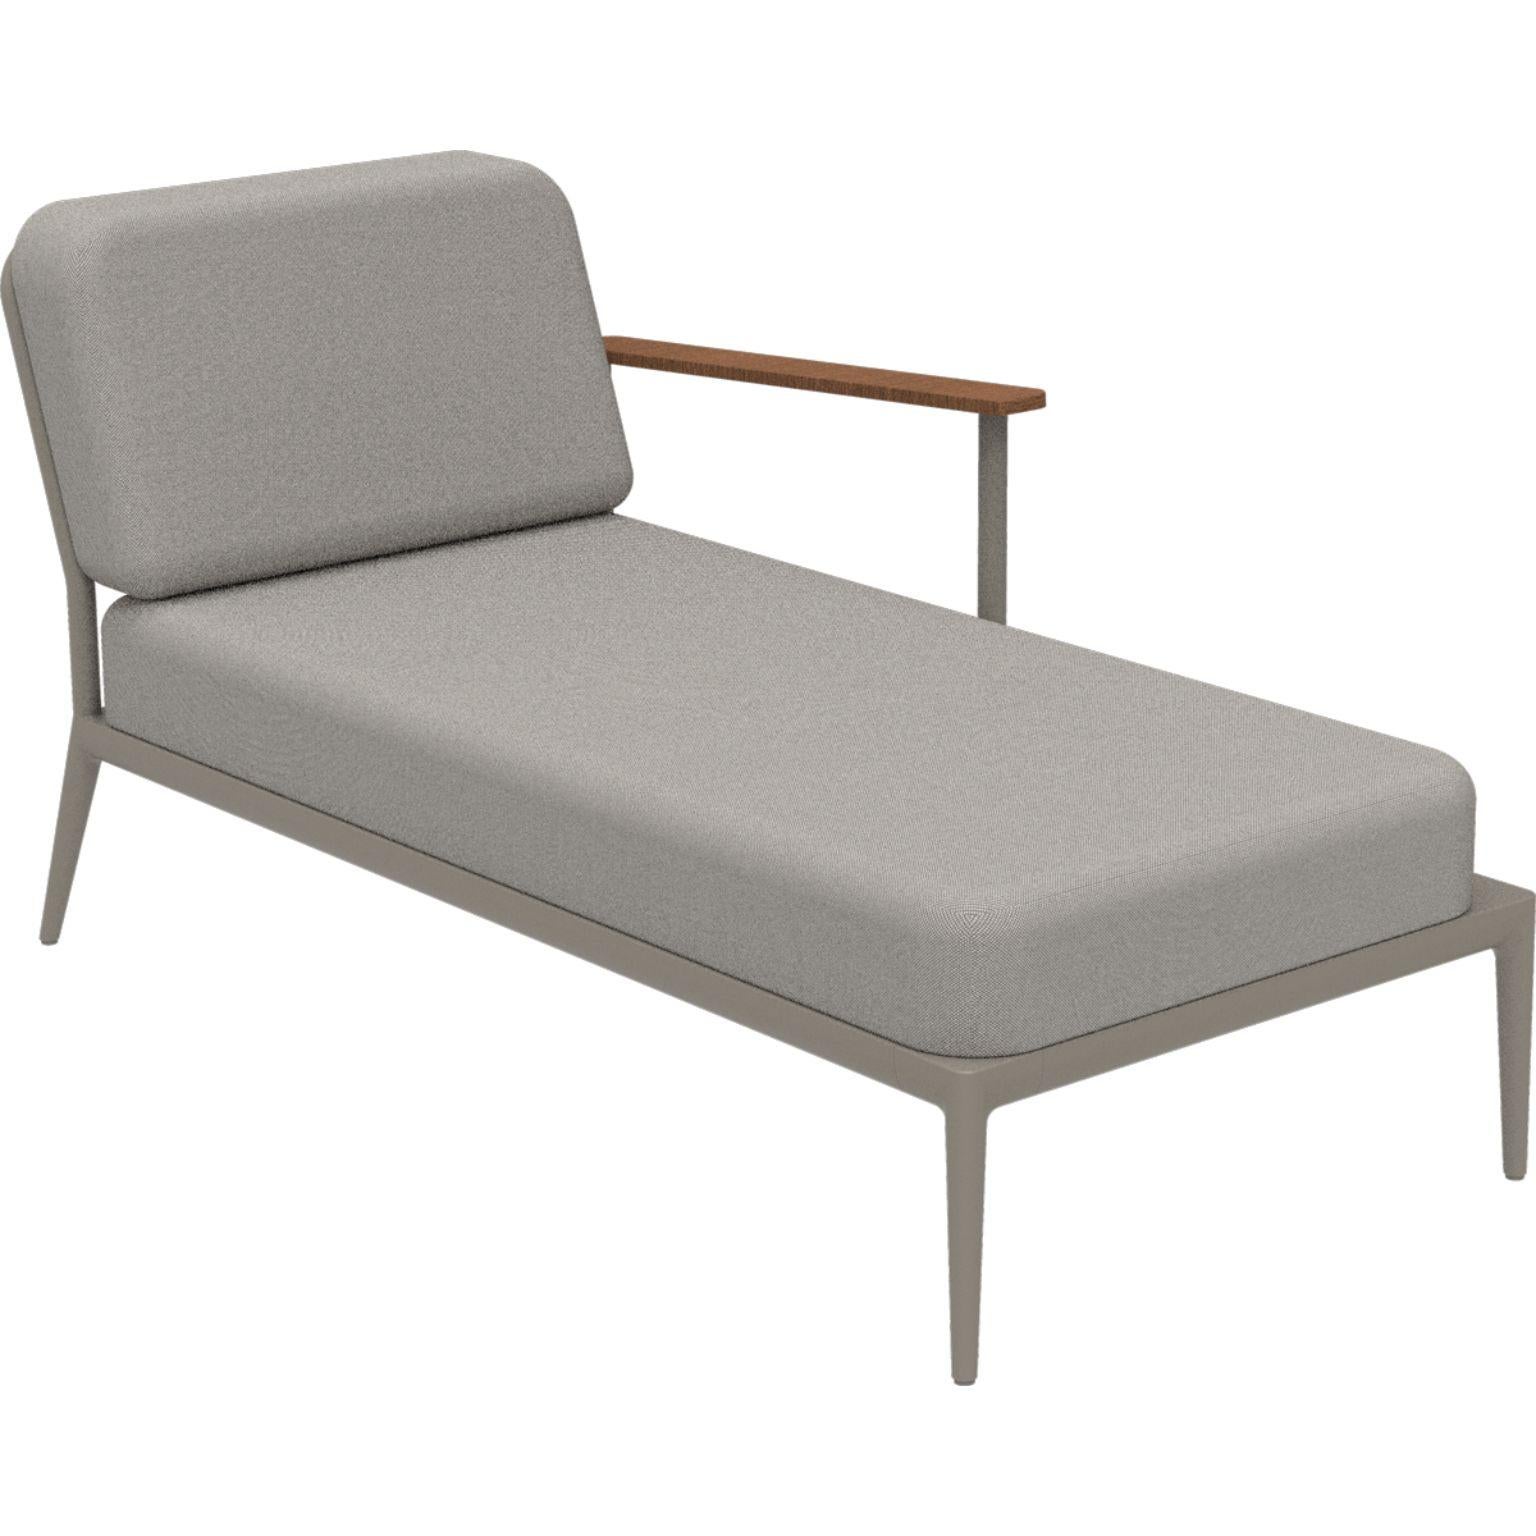 Nature Cream Left Chaise Longue by MOWEE
Dimensions: D155 x W76 x H81 cm (seat height 42 cm).
Material: Aluminum, upholstery and Iroko Wood.
Weight: 28 kg.
Also available in different colors and finishes. Please contact us.

An unmistakable